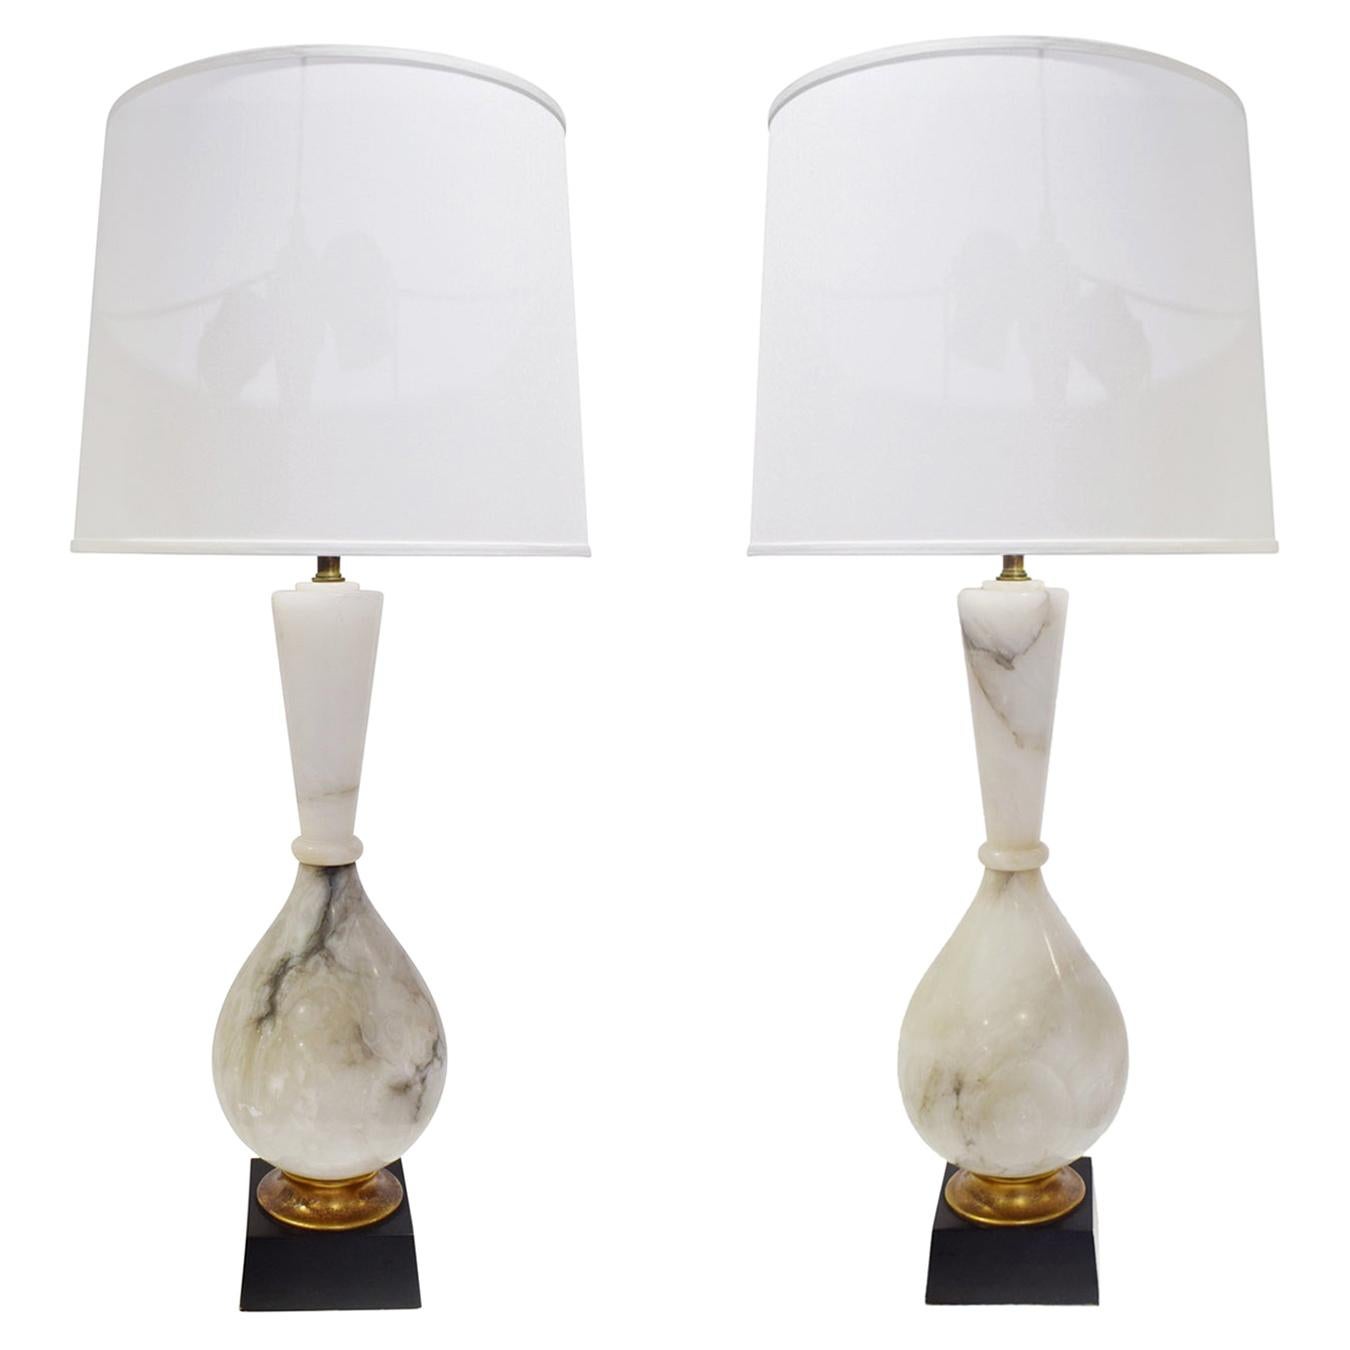 Pair of Large Artisan Marble Table Lamps, 1950s